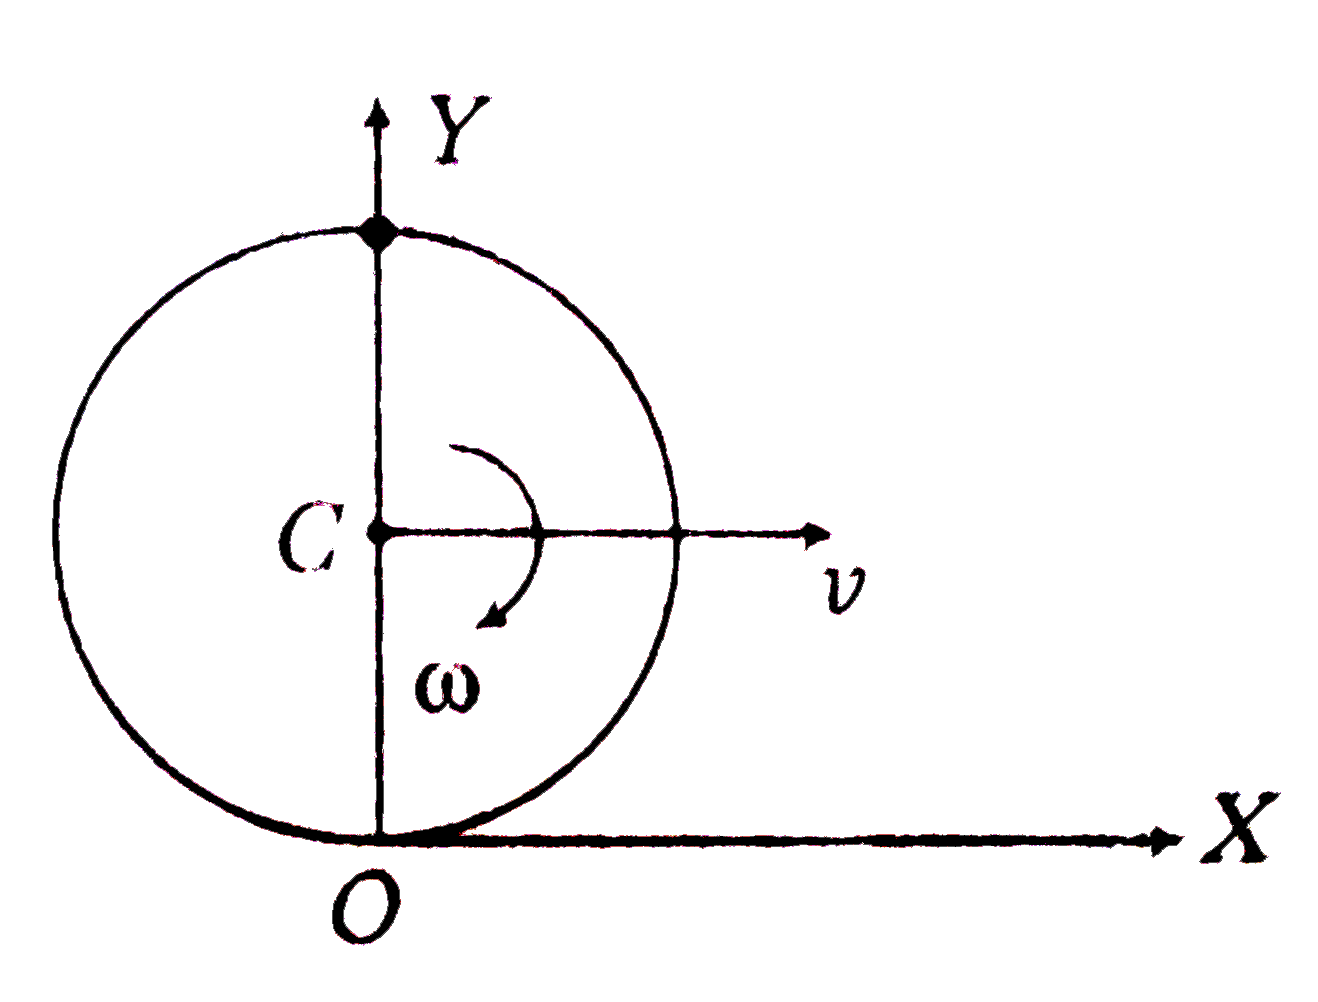 A disc of radius R start at time t=0 moving along the positive X-axis with linear speed b and angular speed omega. Find the x and y-coordinates of the bottommost point at any time t.